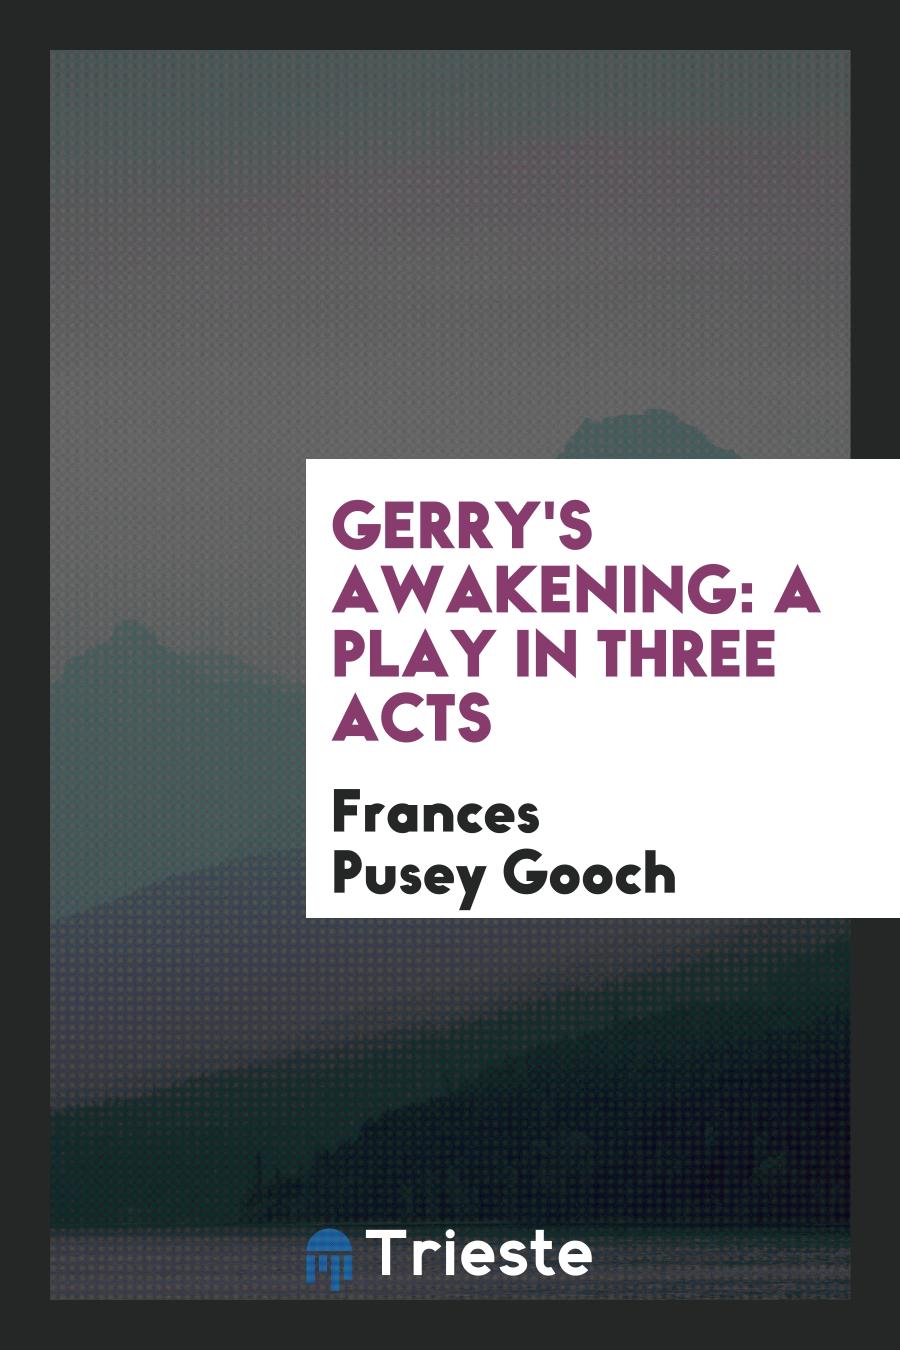 Gerry's Awakening: A Play in Three Acts